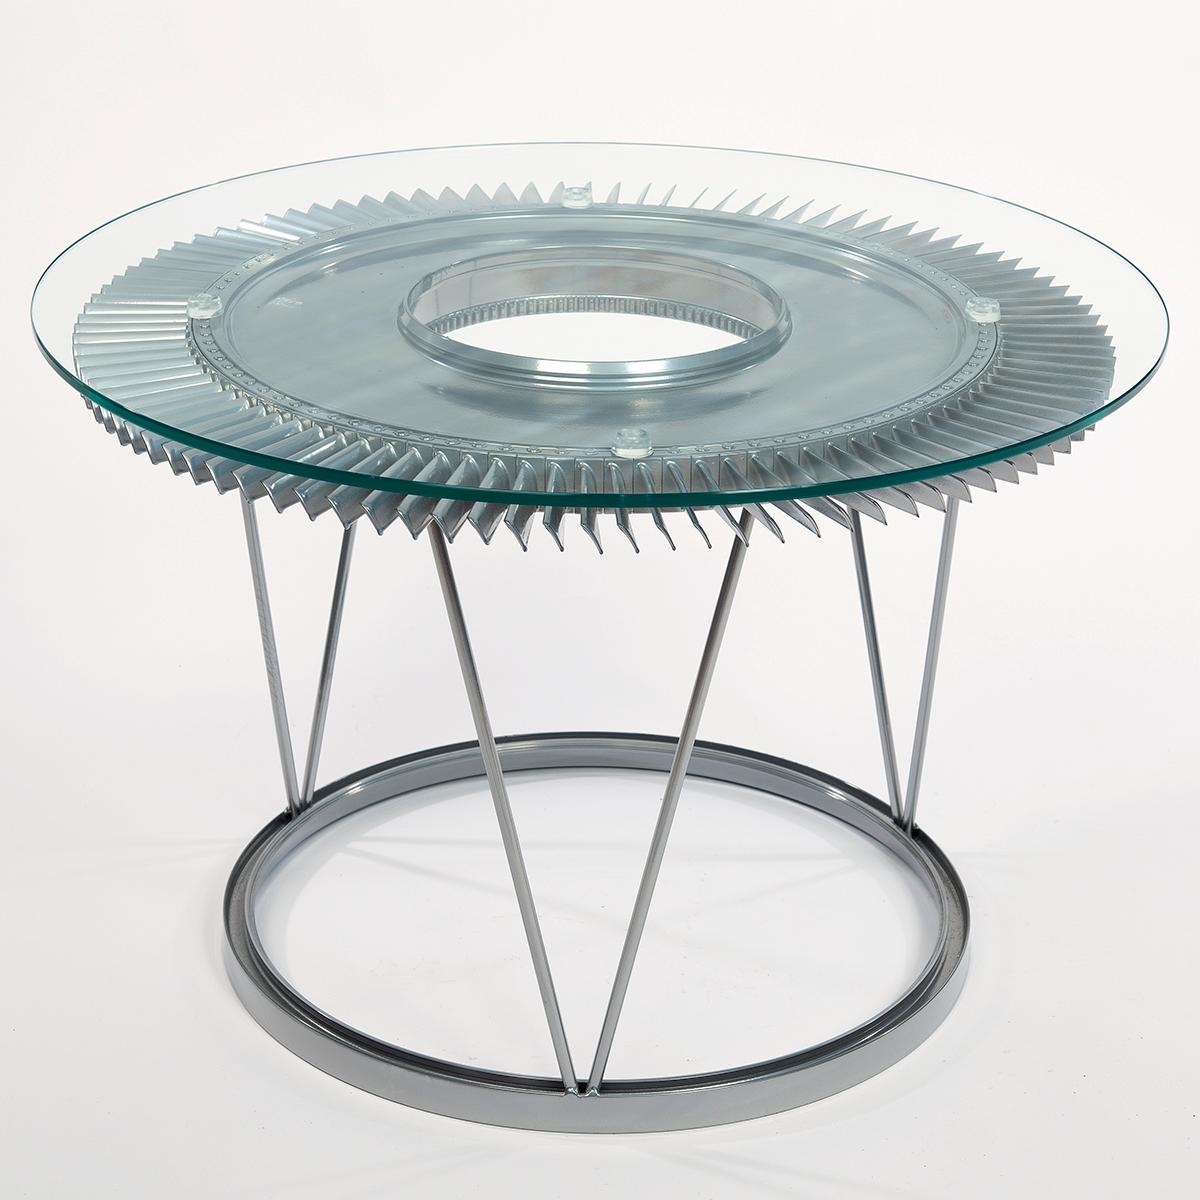 The base of our stunning coffee table is a professionally stripped and chrome polished fan blade from a Rolls Royce Avon jet engine from a RAF Canberra bomber. The table top is toughened/ secure glass.

The Royal Air Force English Electric Canberra